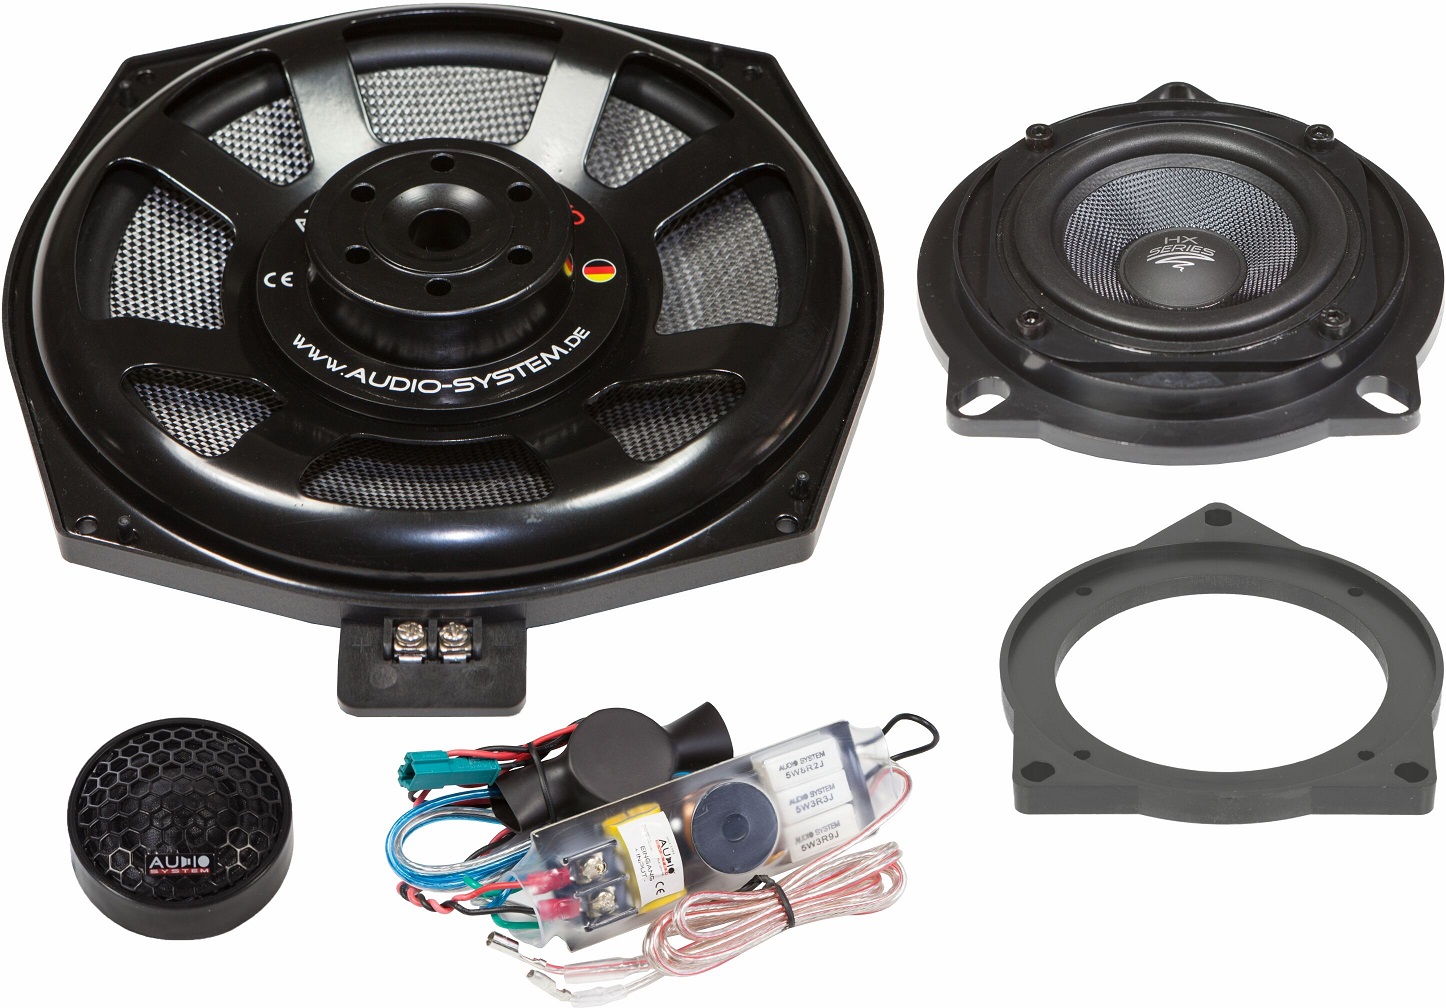 Audio System X 200 BMW Plus X-Series 3-way active front-part system for BMW E60, 61,81,82,84,87,88,90,91,92